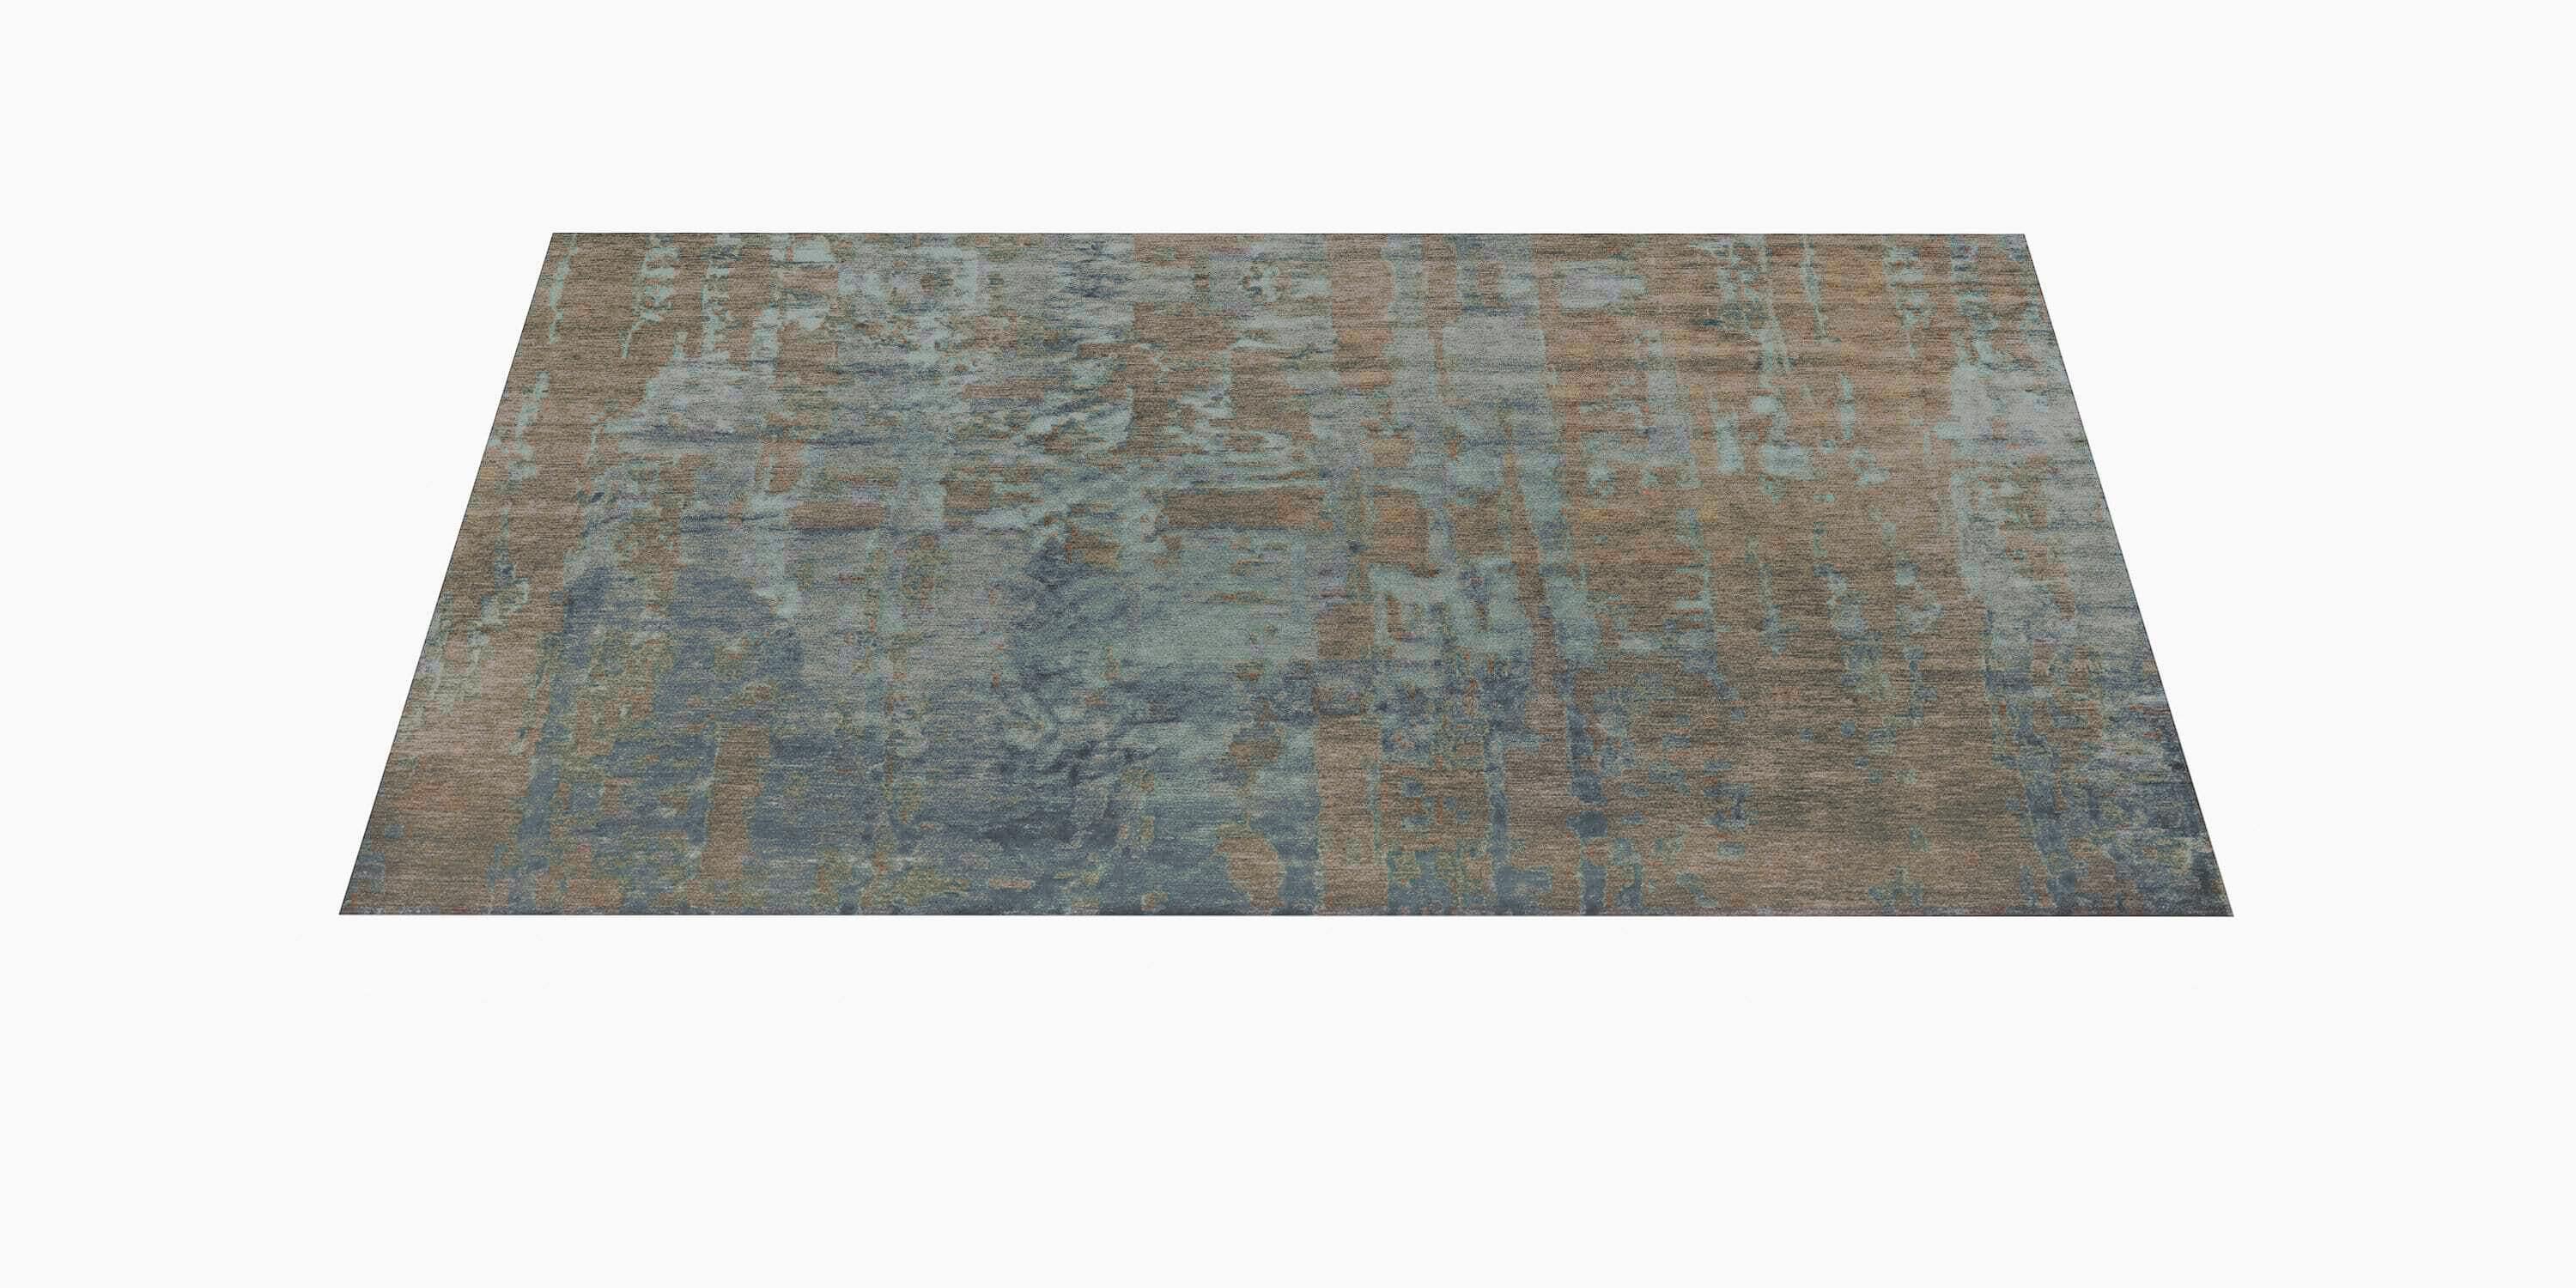 Meticulously hand-knotted by master artisans from soft New Zealand wool and silken threads, this luxurious rug has the stunning dimension and texture of an expressionist painting. The dense, medium-height finish feels plush underfoot. The Ben